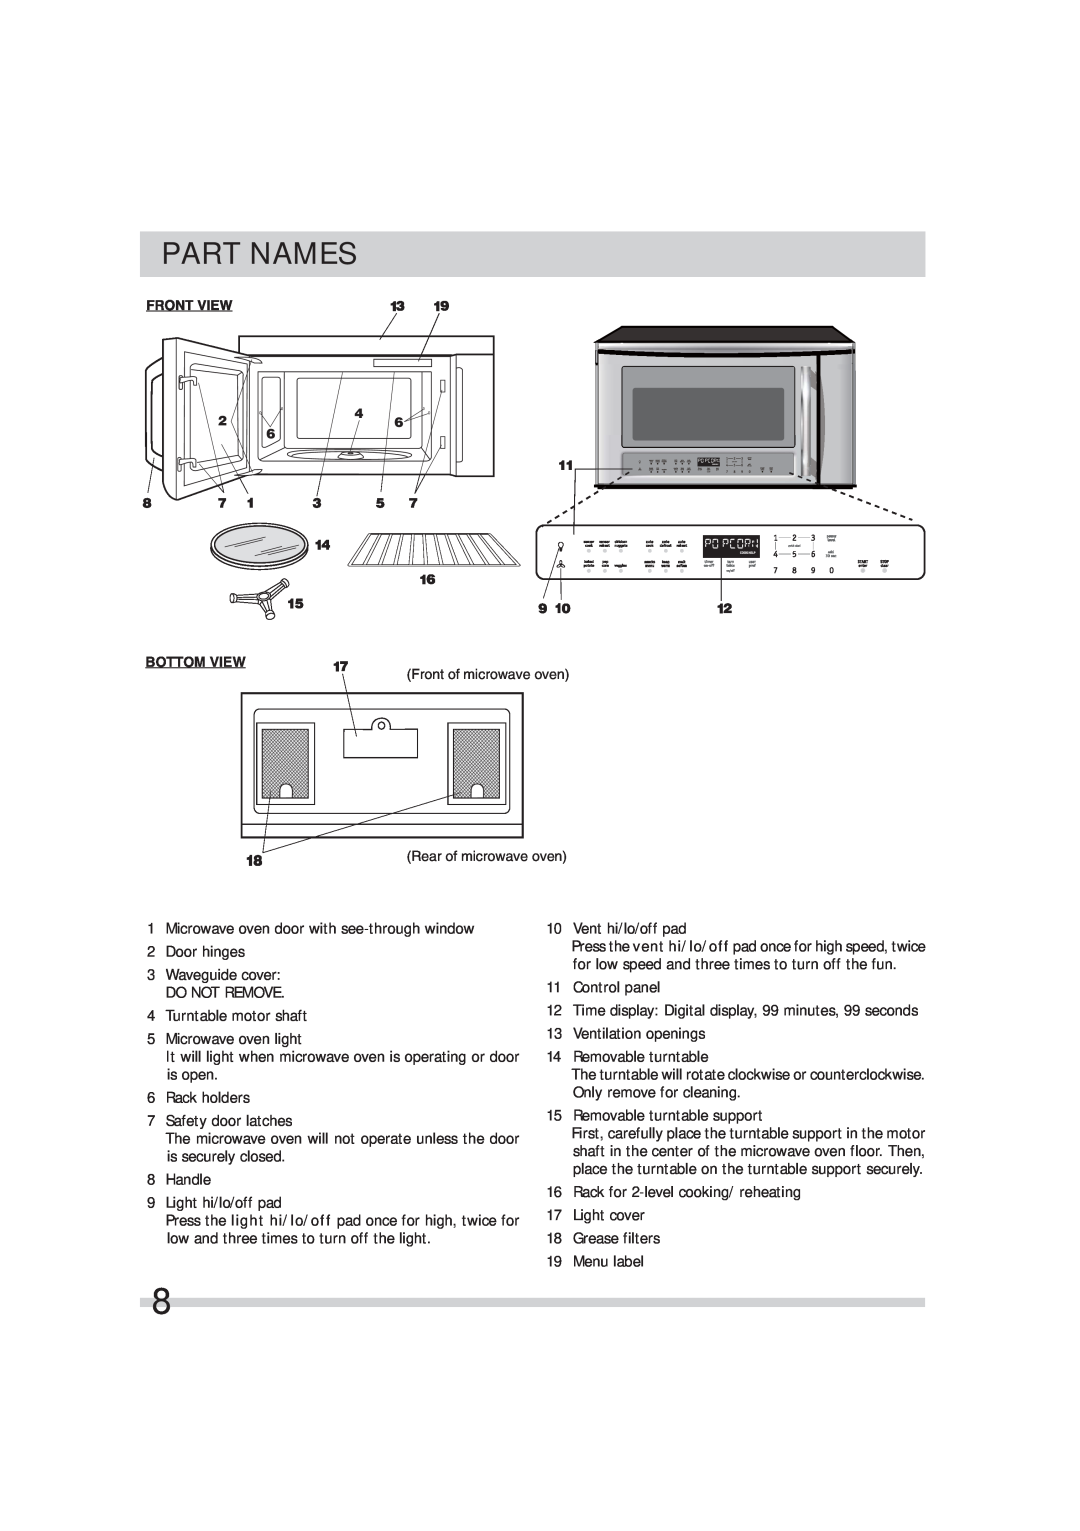 Frigidaire 316495054 manual Part Names, Bottom View, Front of microwave oven Rear of microwave oven 